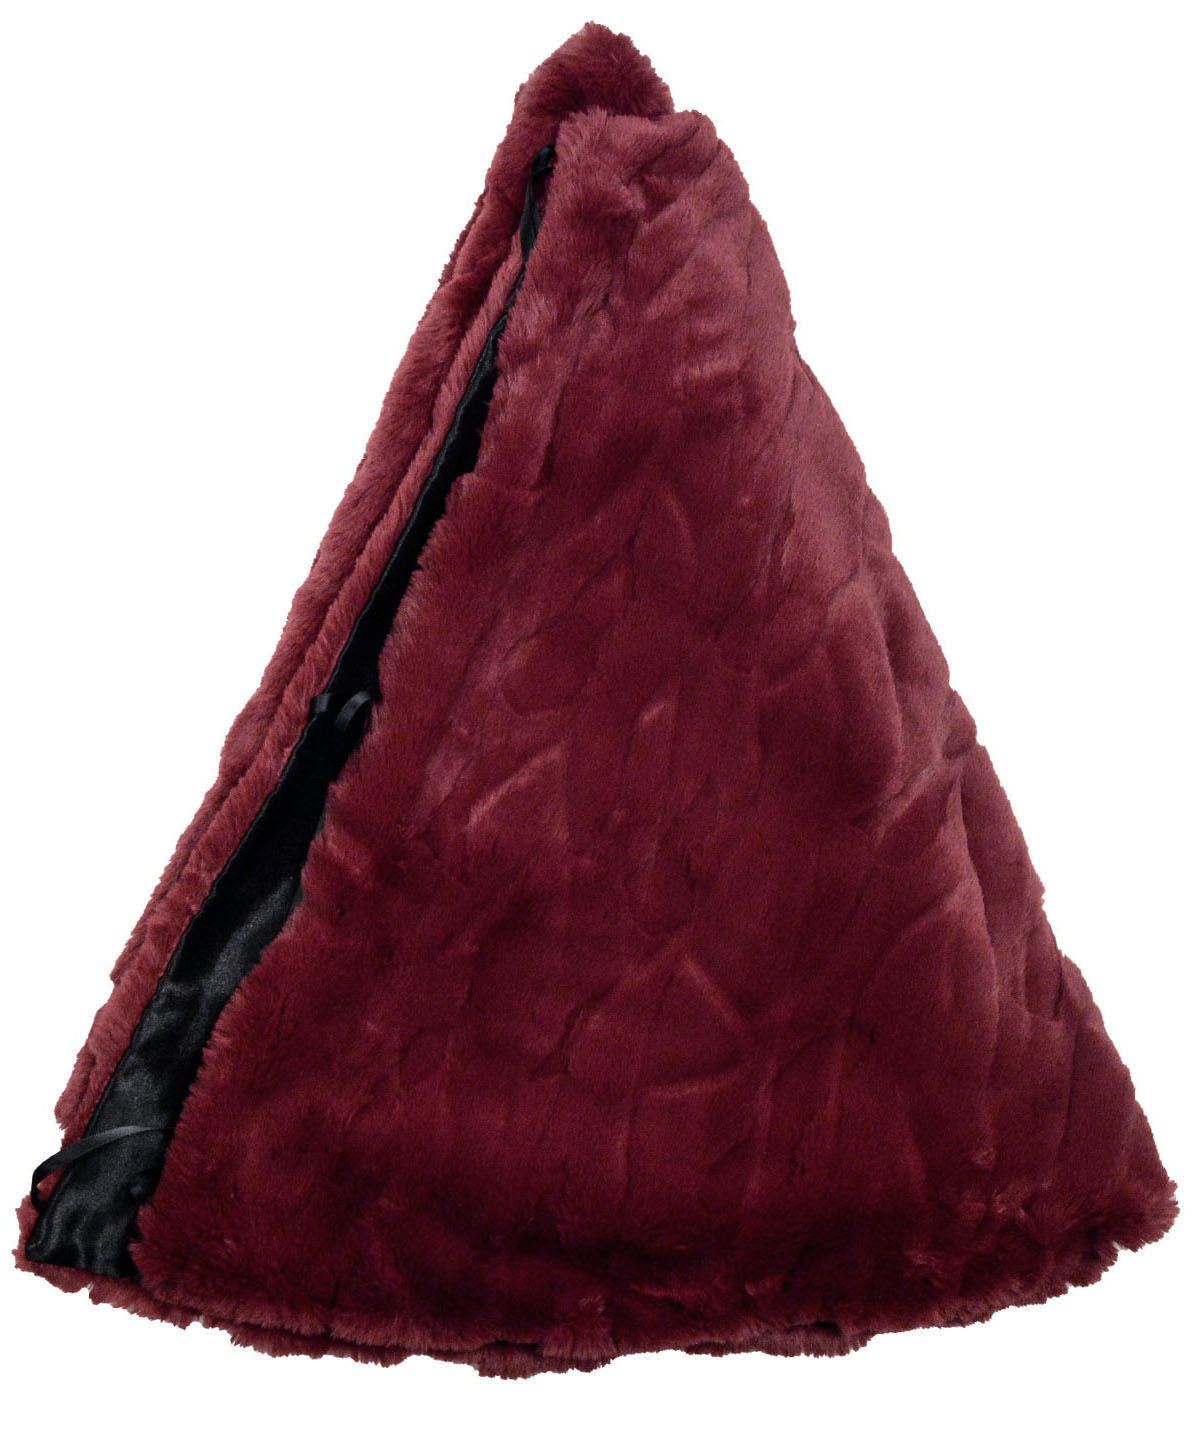 Tree Skirt - Luxury Faux Fur in Cranberry Creek - Sold Out!